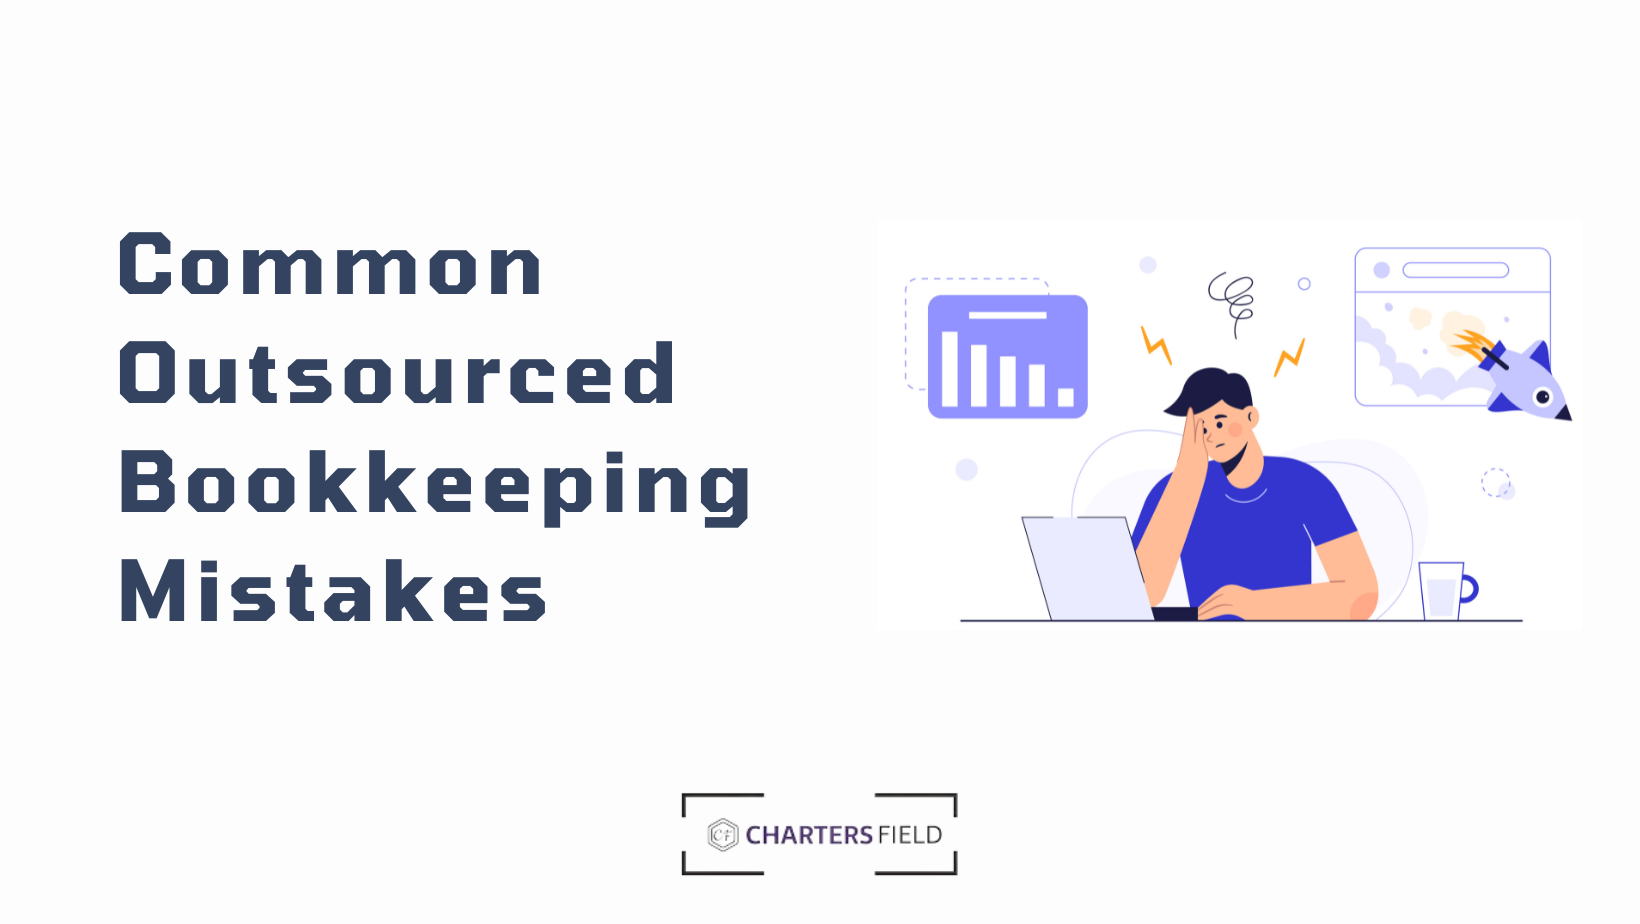 Common Outsourced Bookkeeping Mistakes